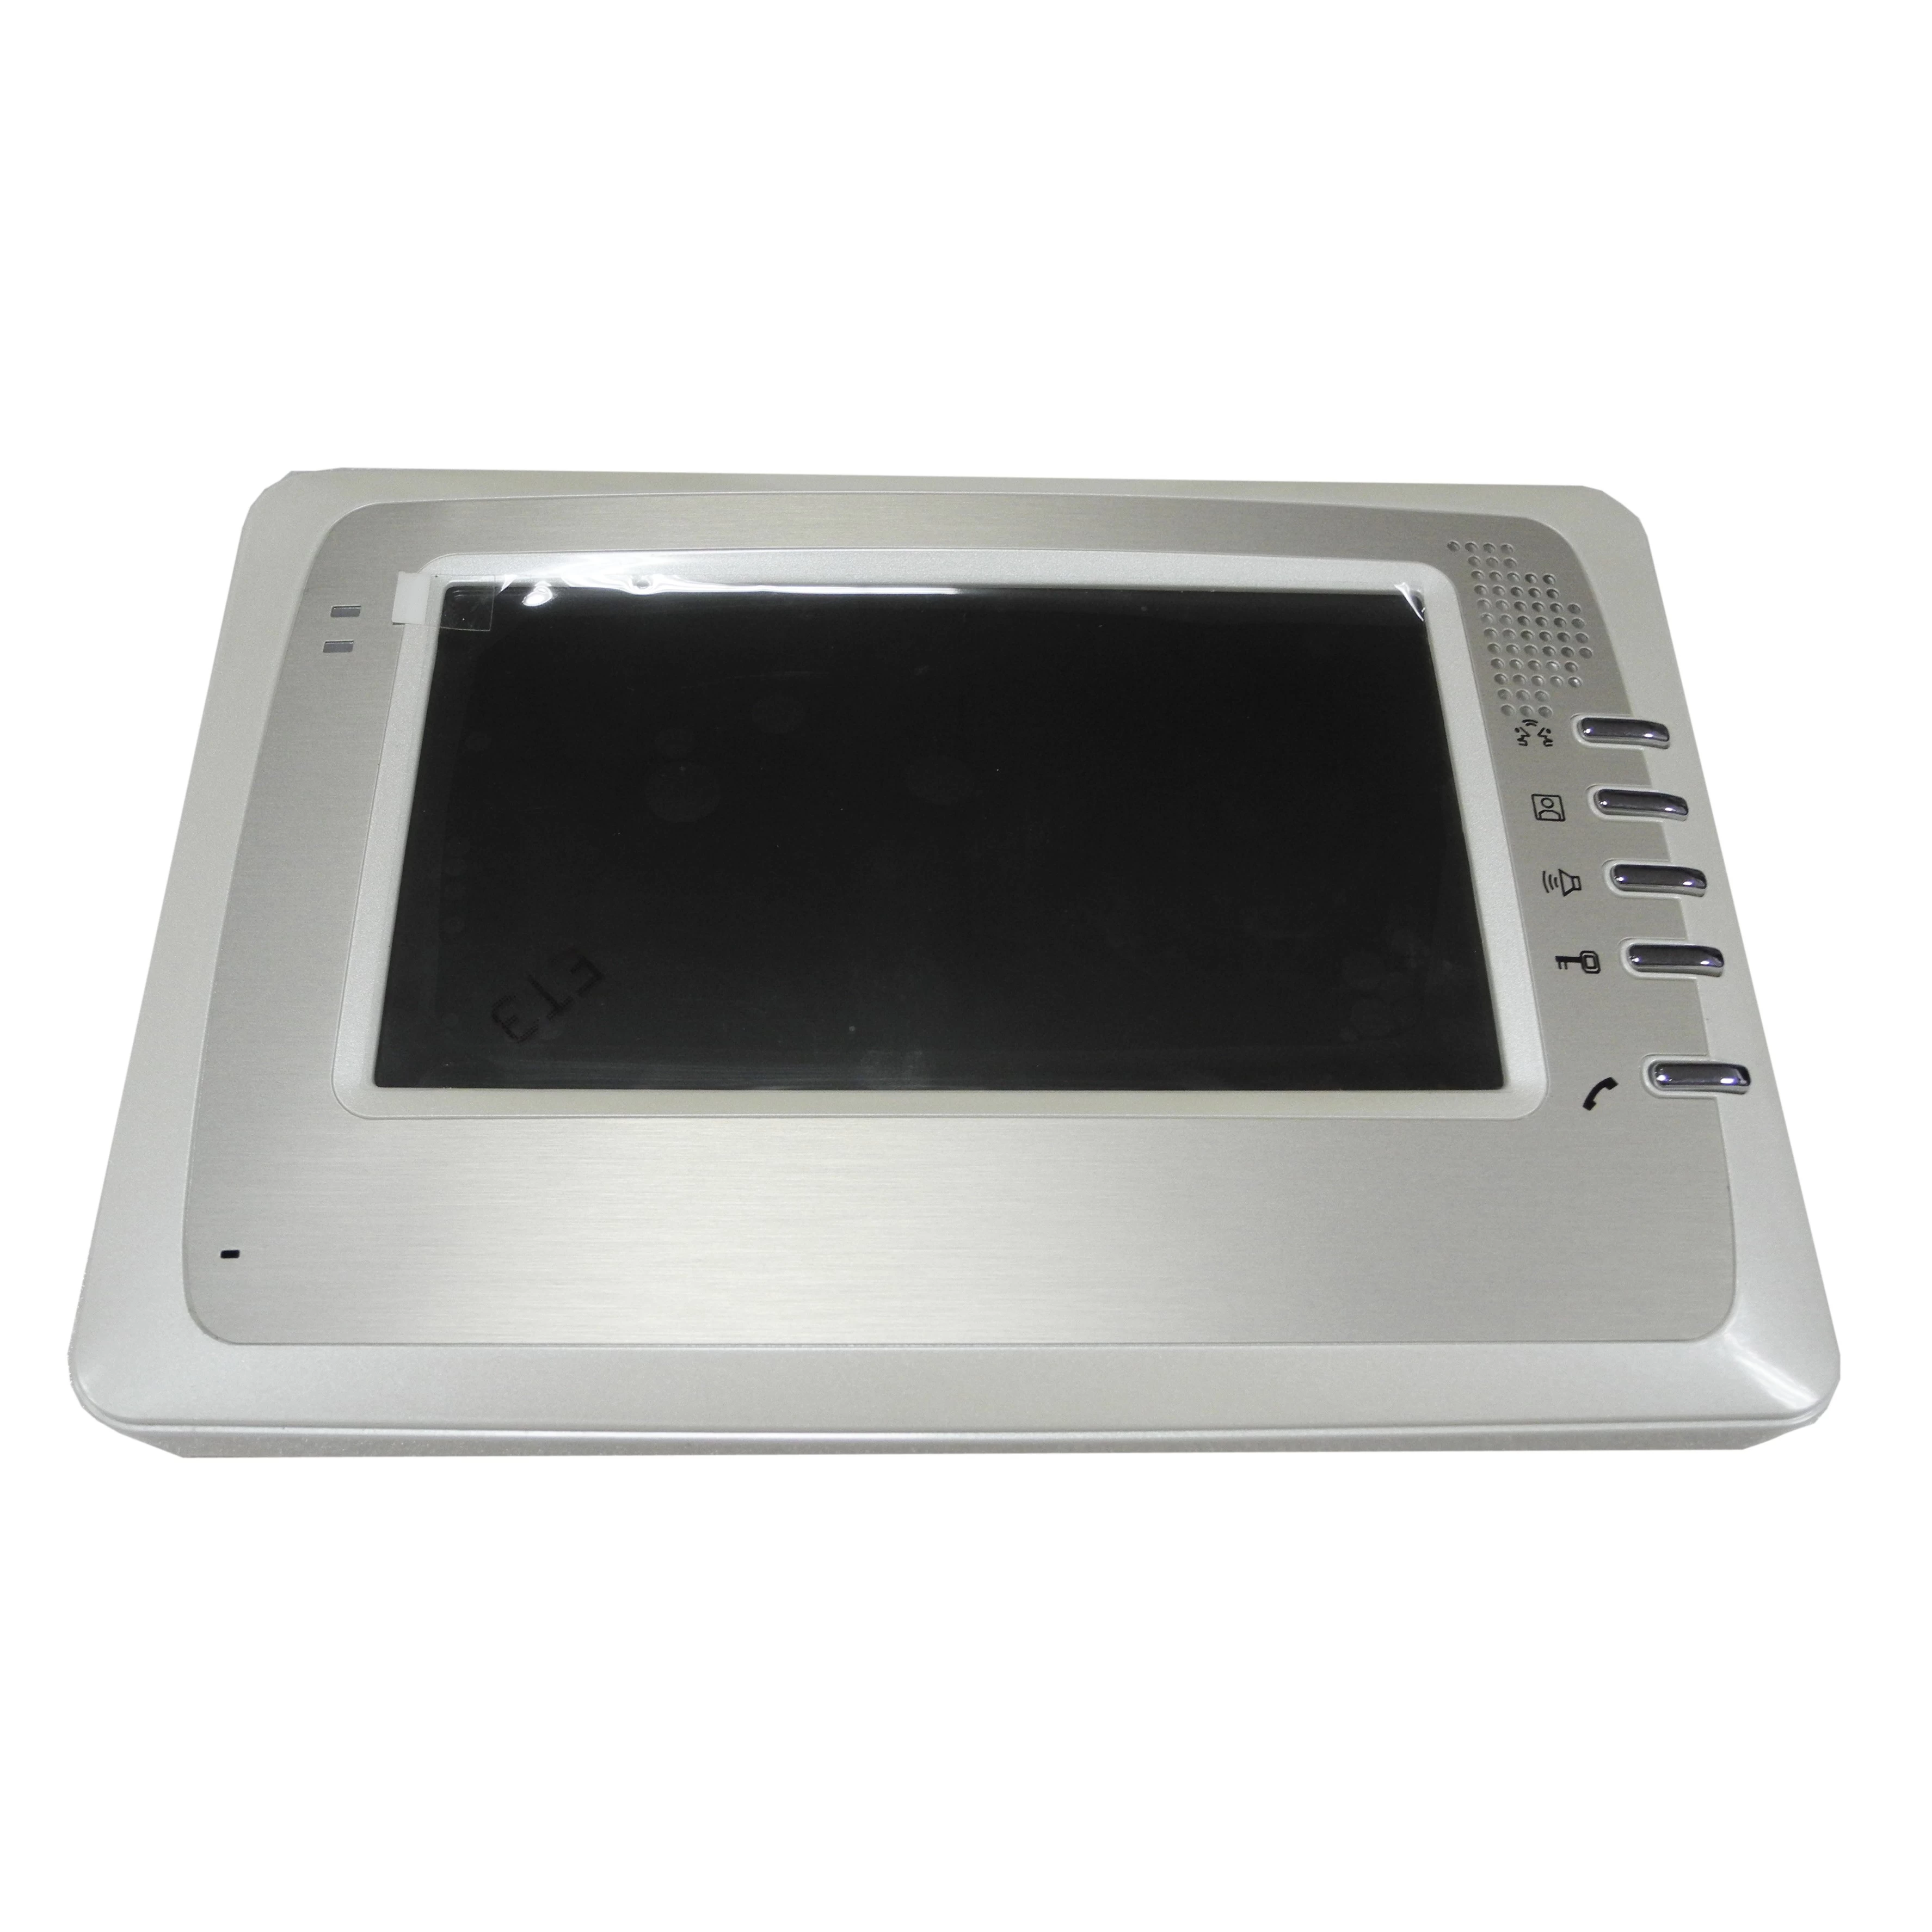 China 7 inch 2 Wire DIY Handenvrij Monitor Voor Building Entry System PY-M8A373C fabrikant